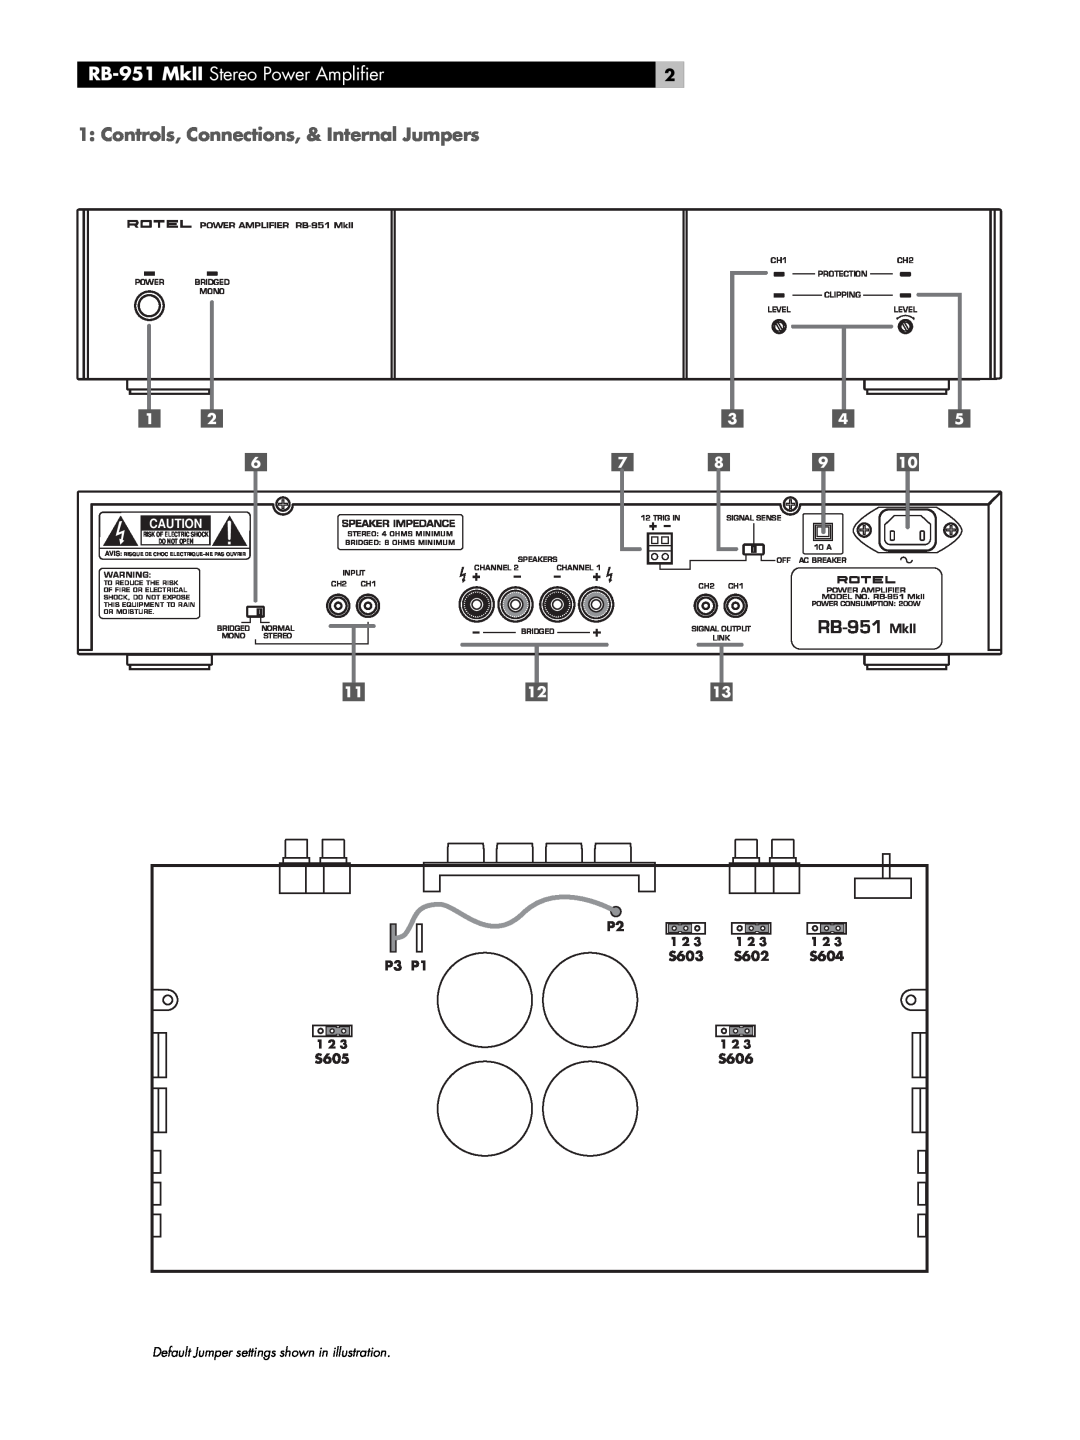 Rotel owner manual RB-951MkII Stereo Power Amplifier, Controls, Connections, & Internal Jumpers, 1112 